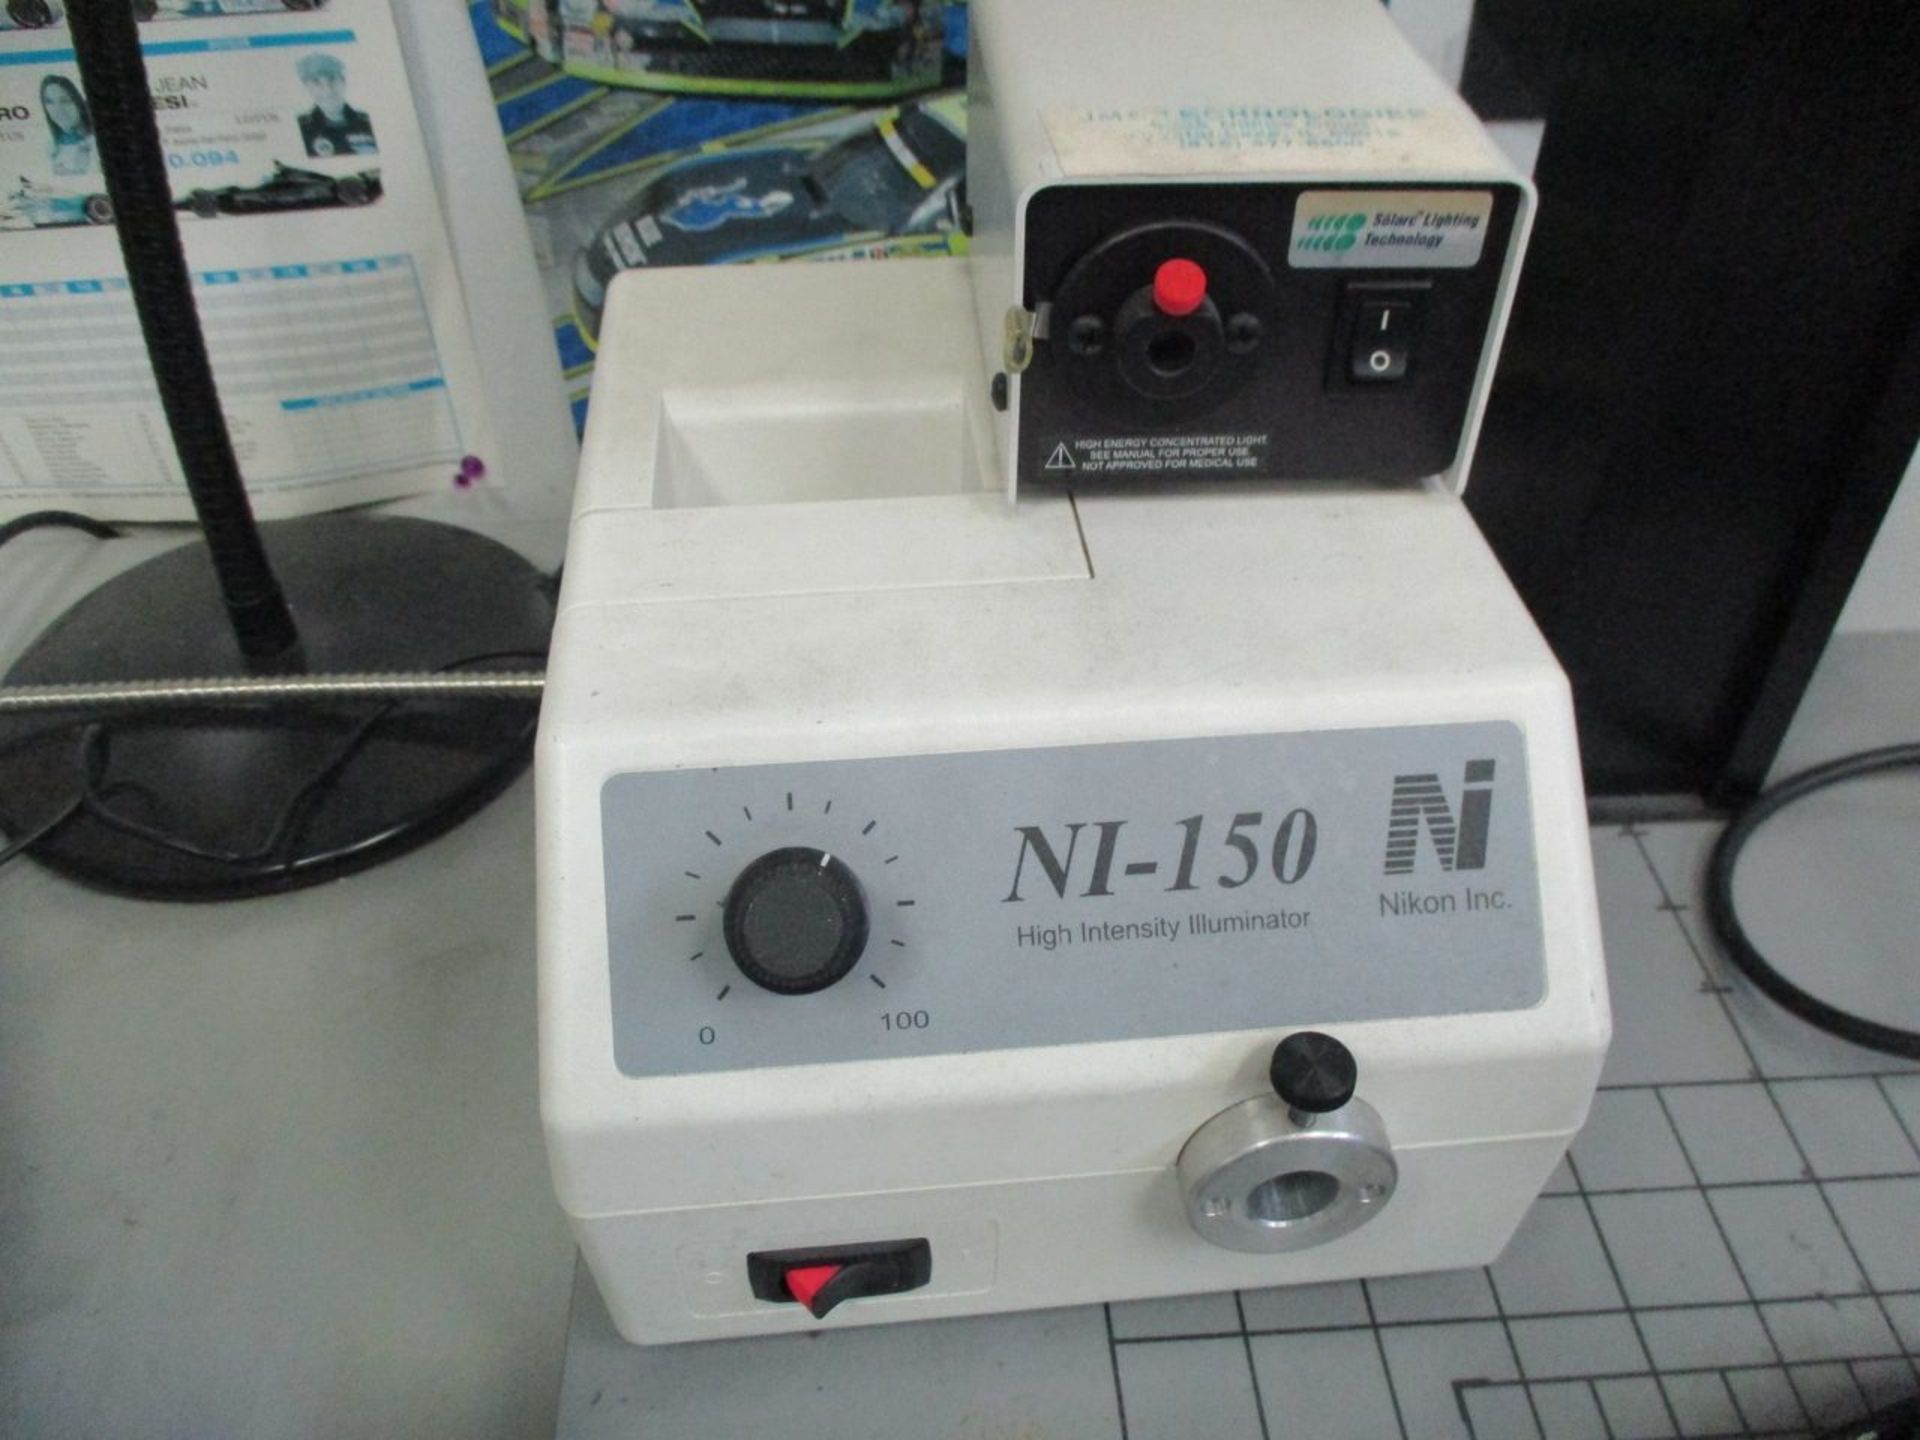 Bencher Copy Mate II Fluorescent Tabletop Producer with RTSC LCL-211H Probe and Nikon NI-150 High - Image 3 of 3